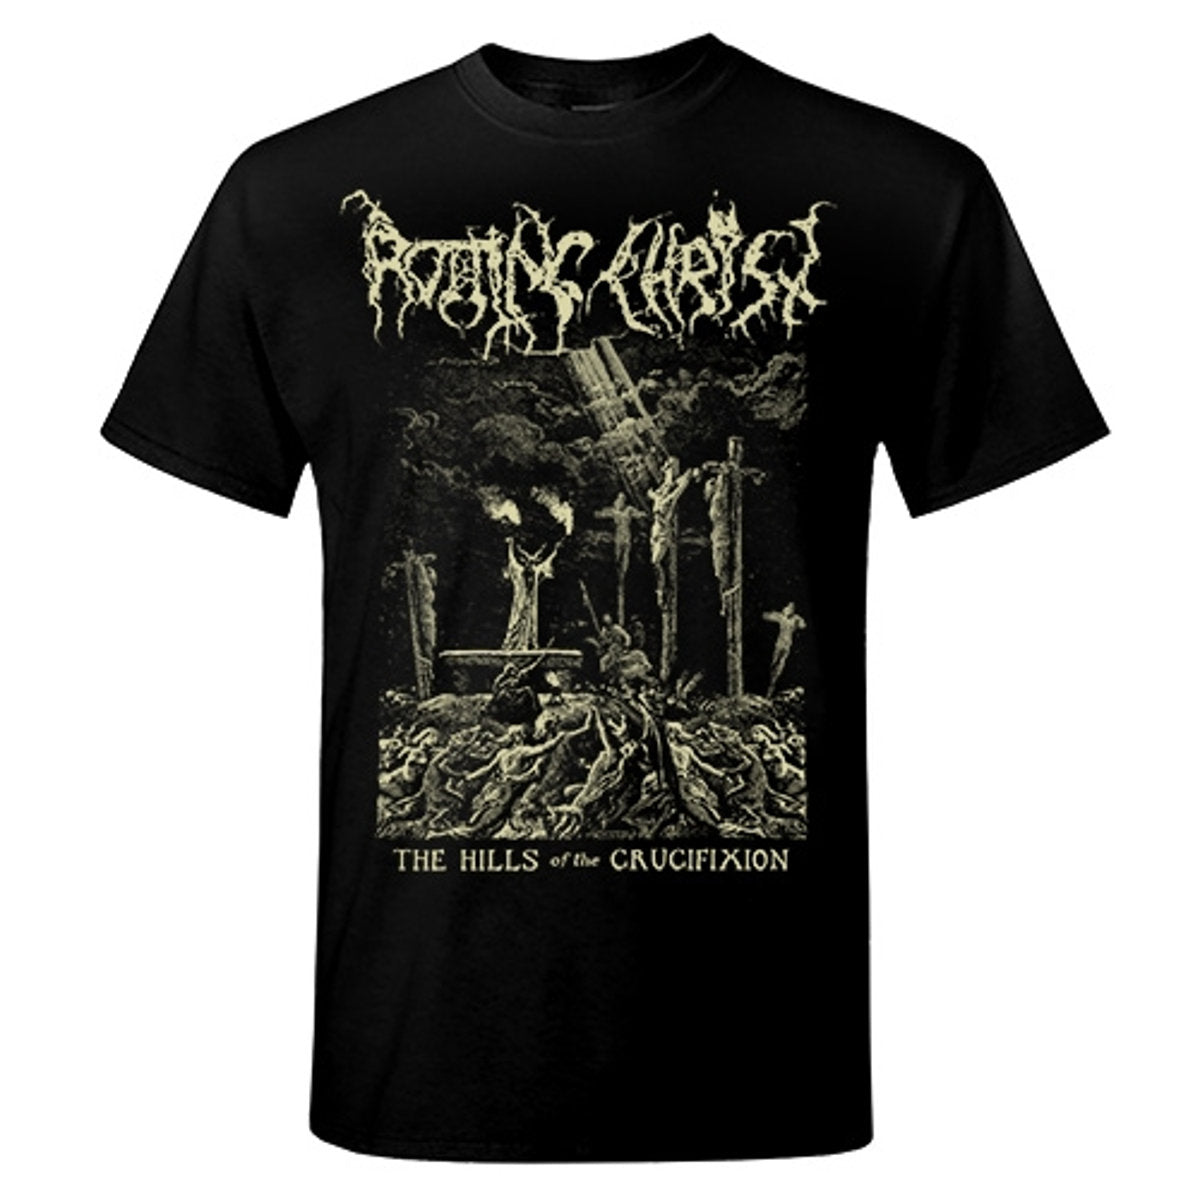 Rotting Christ "The Hills Of The Crucifixion" T shirt